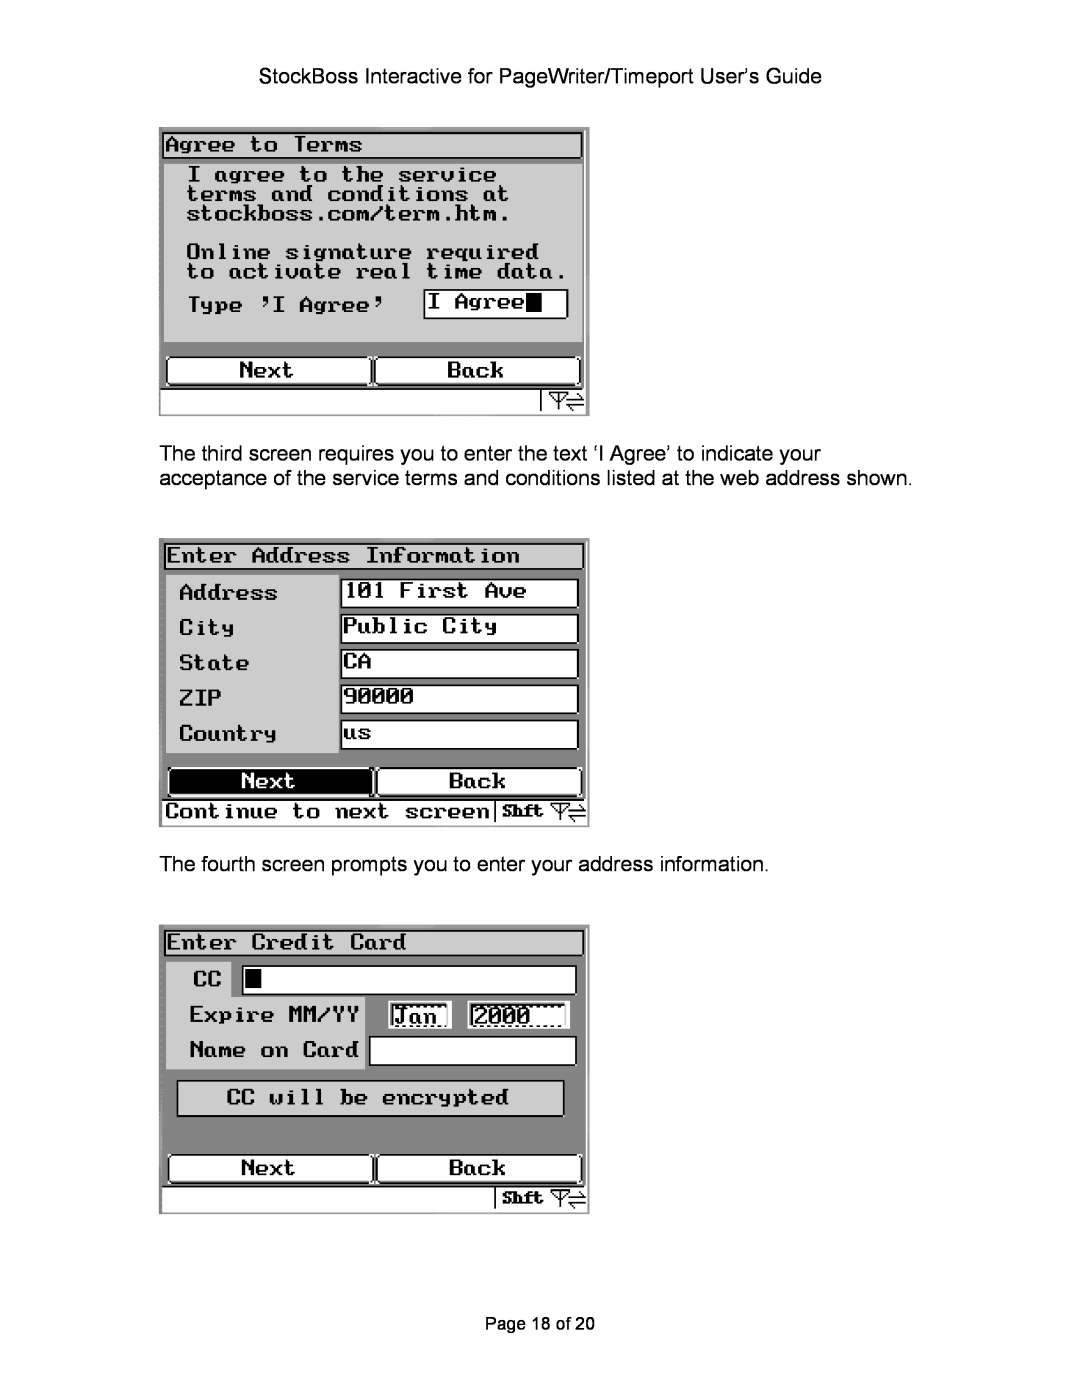 Motorola P930 Series manual StockBoss Interactive for PageWriter/Timeport User’s Guide, Page 18 of 